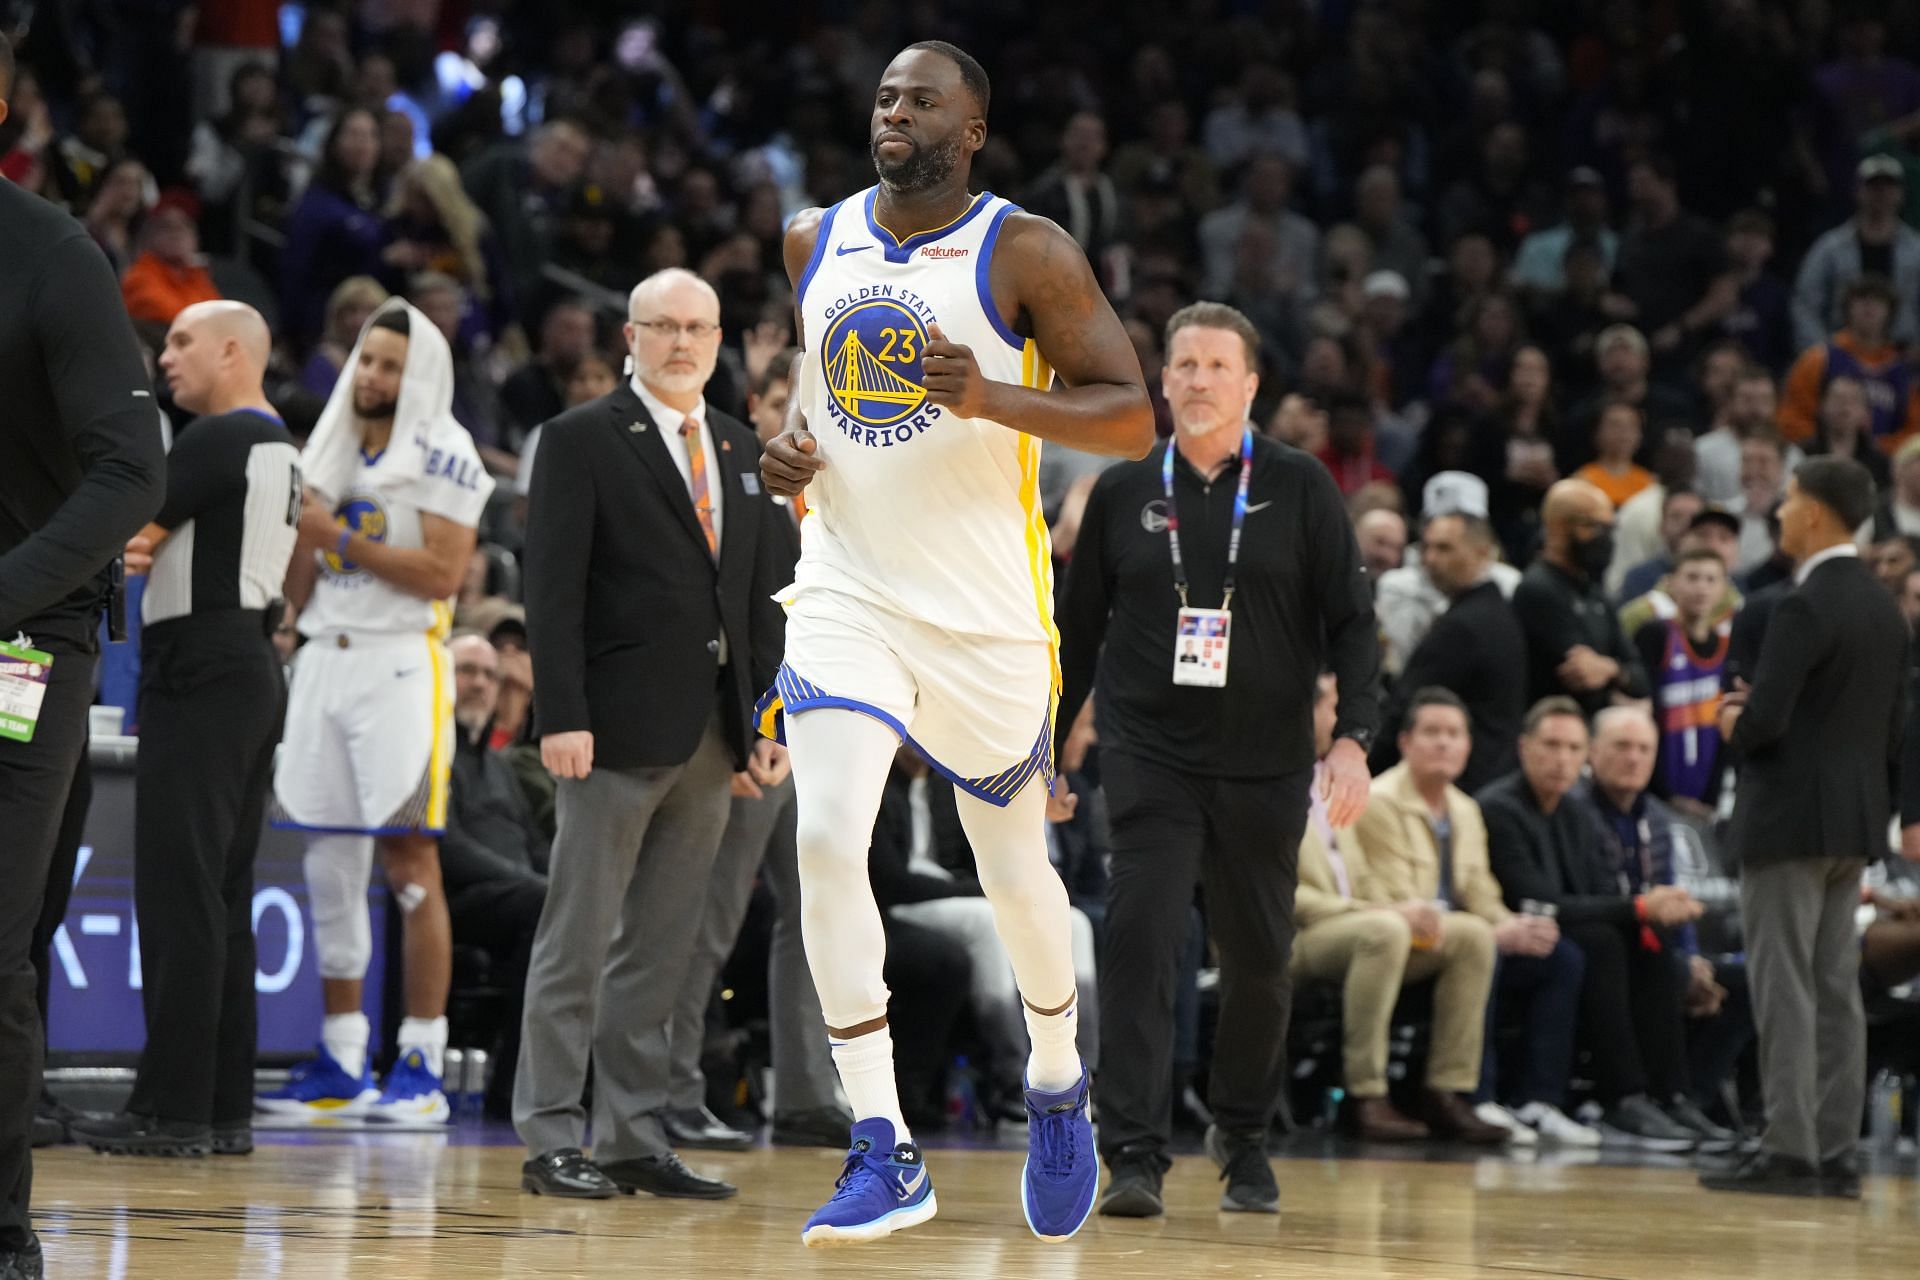 Draymond Green is suspended indefinitely by the NBA.